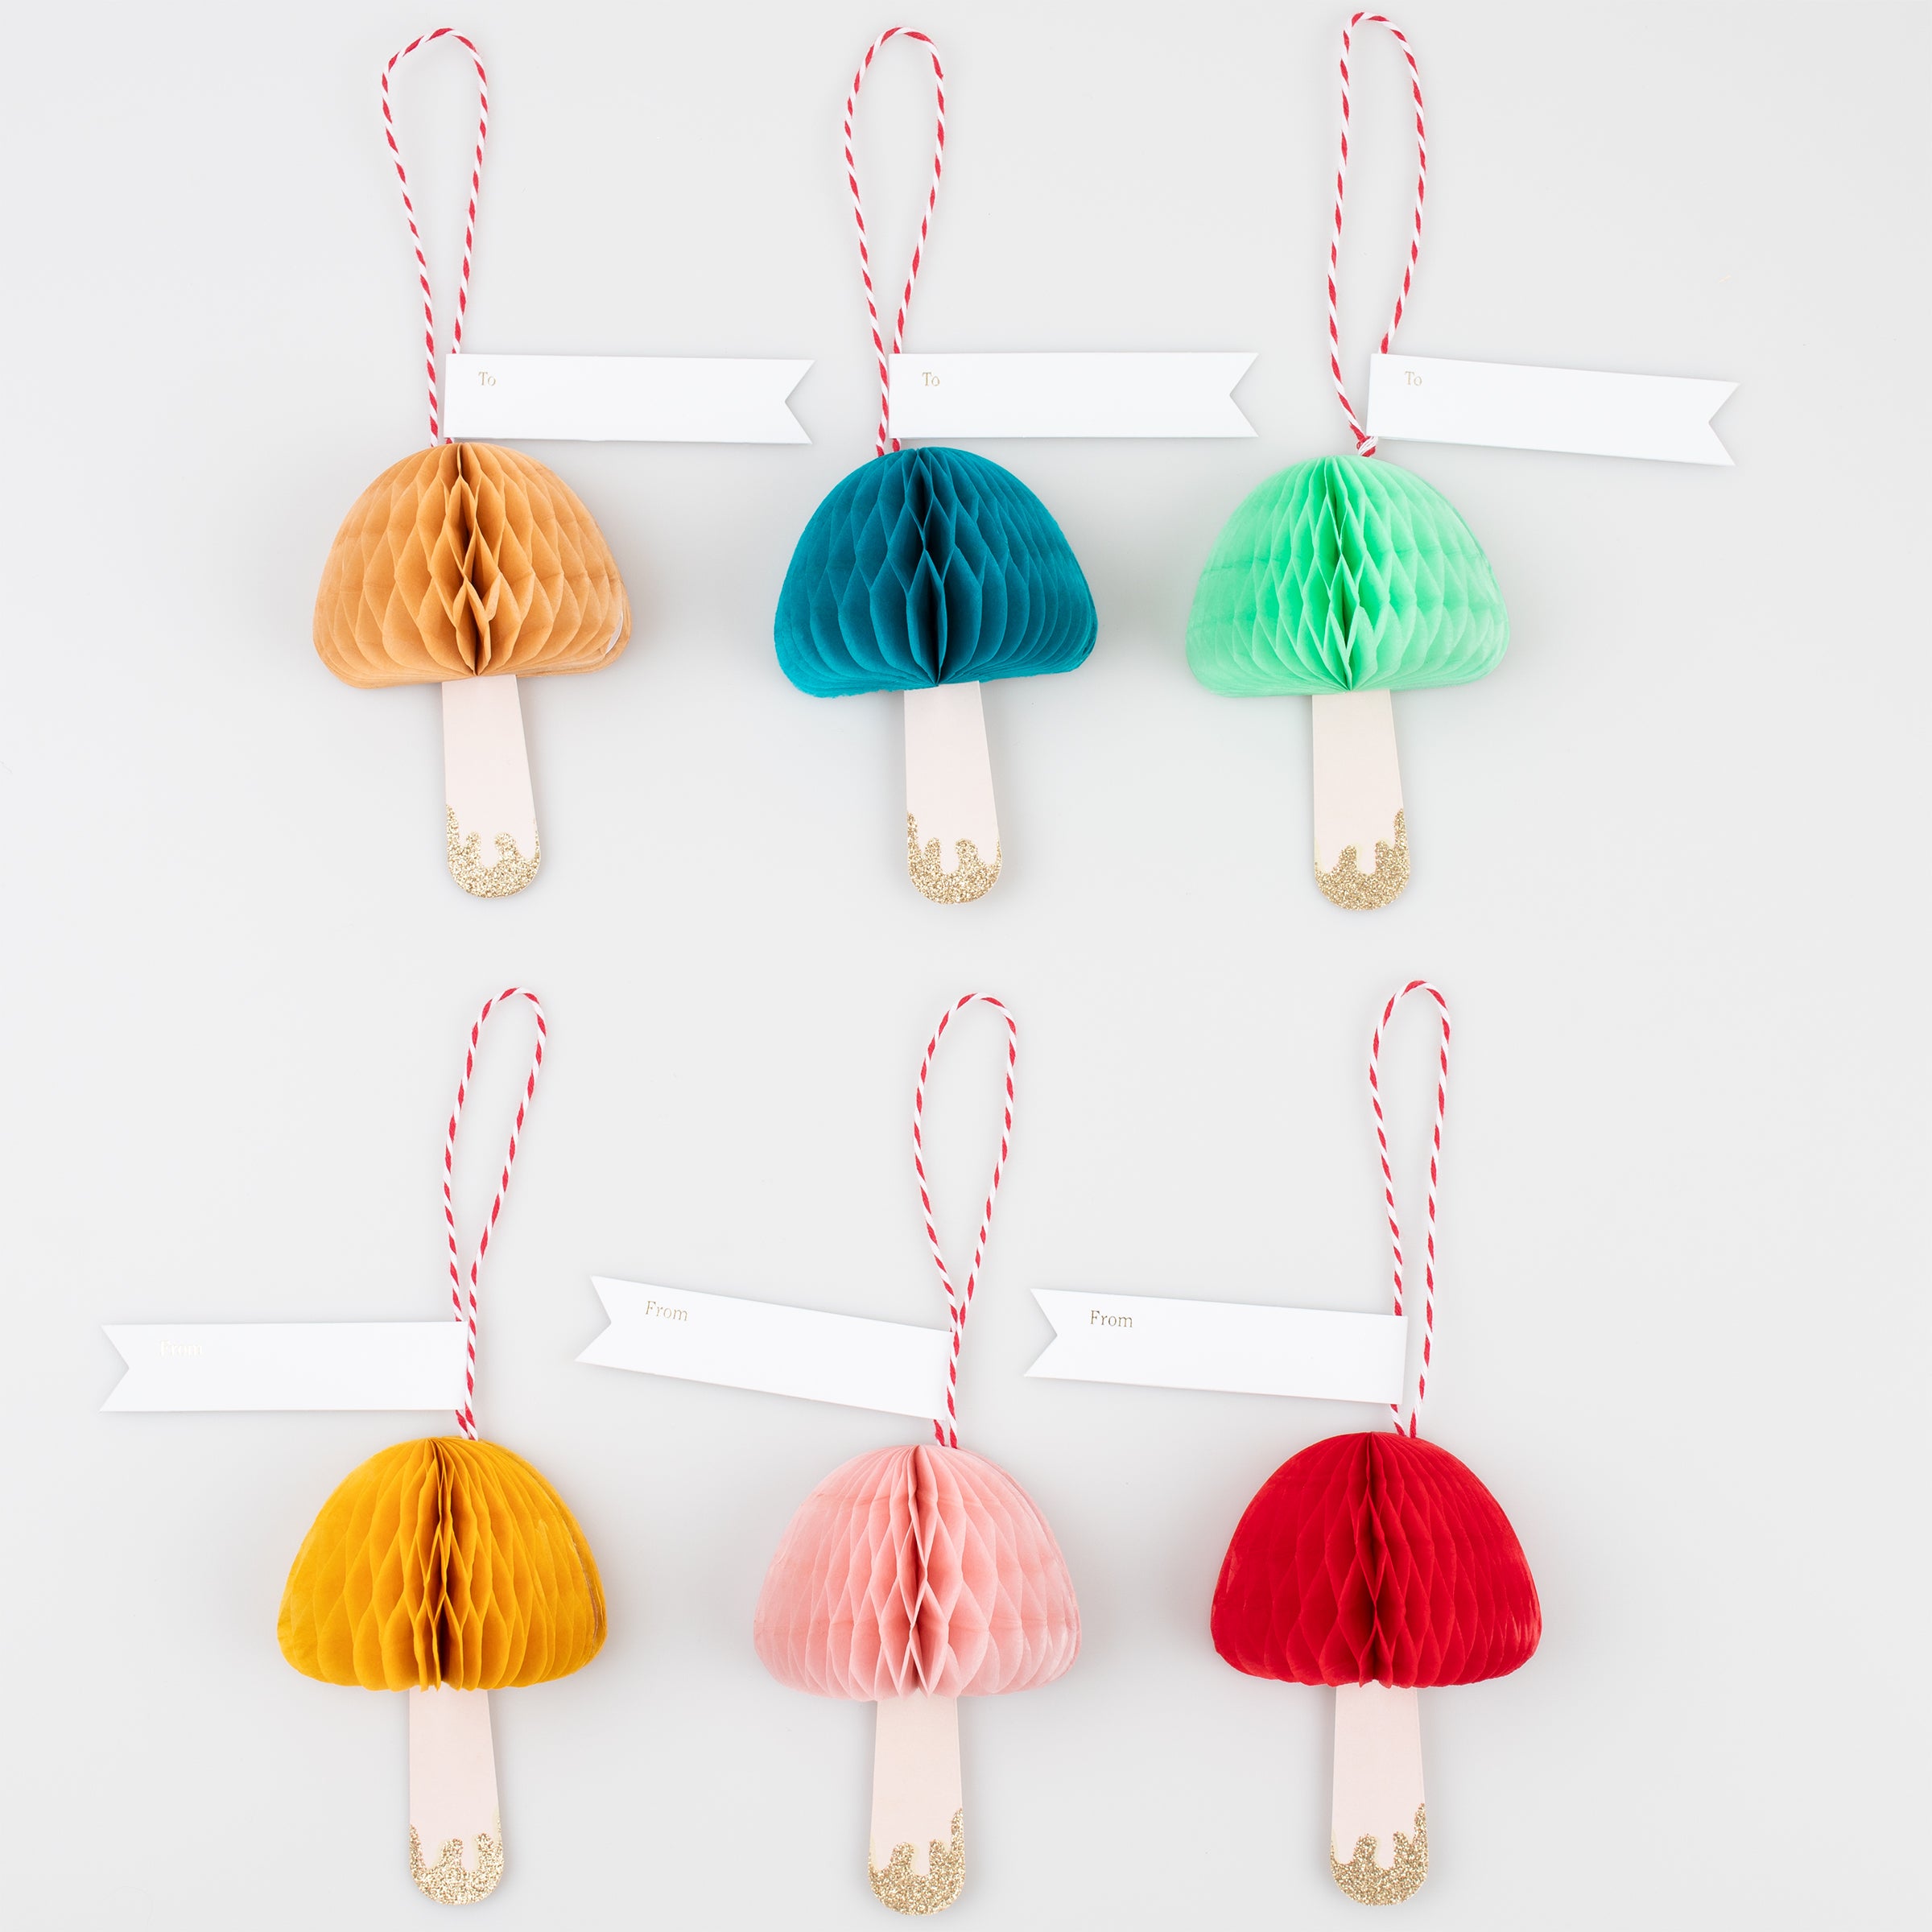 Our honeycomb decorations, in the shape of colorful mushrooms, also make wonderful tags for gifts.